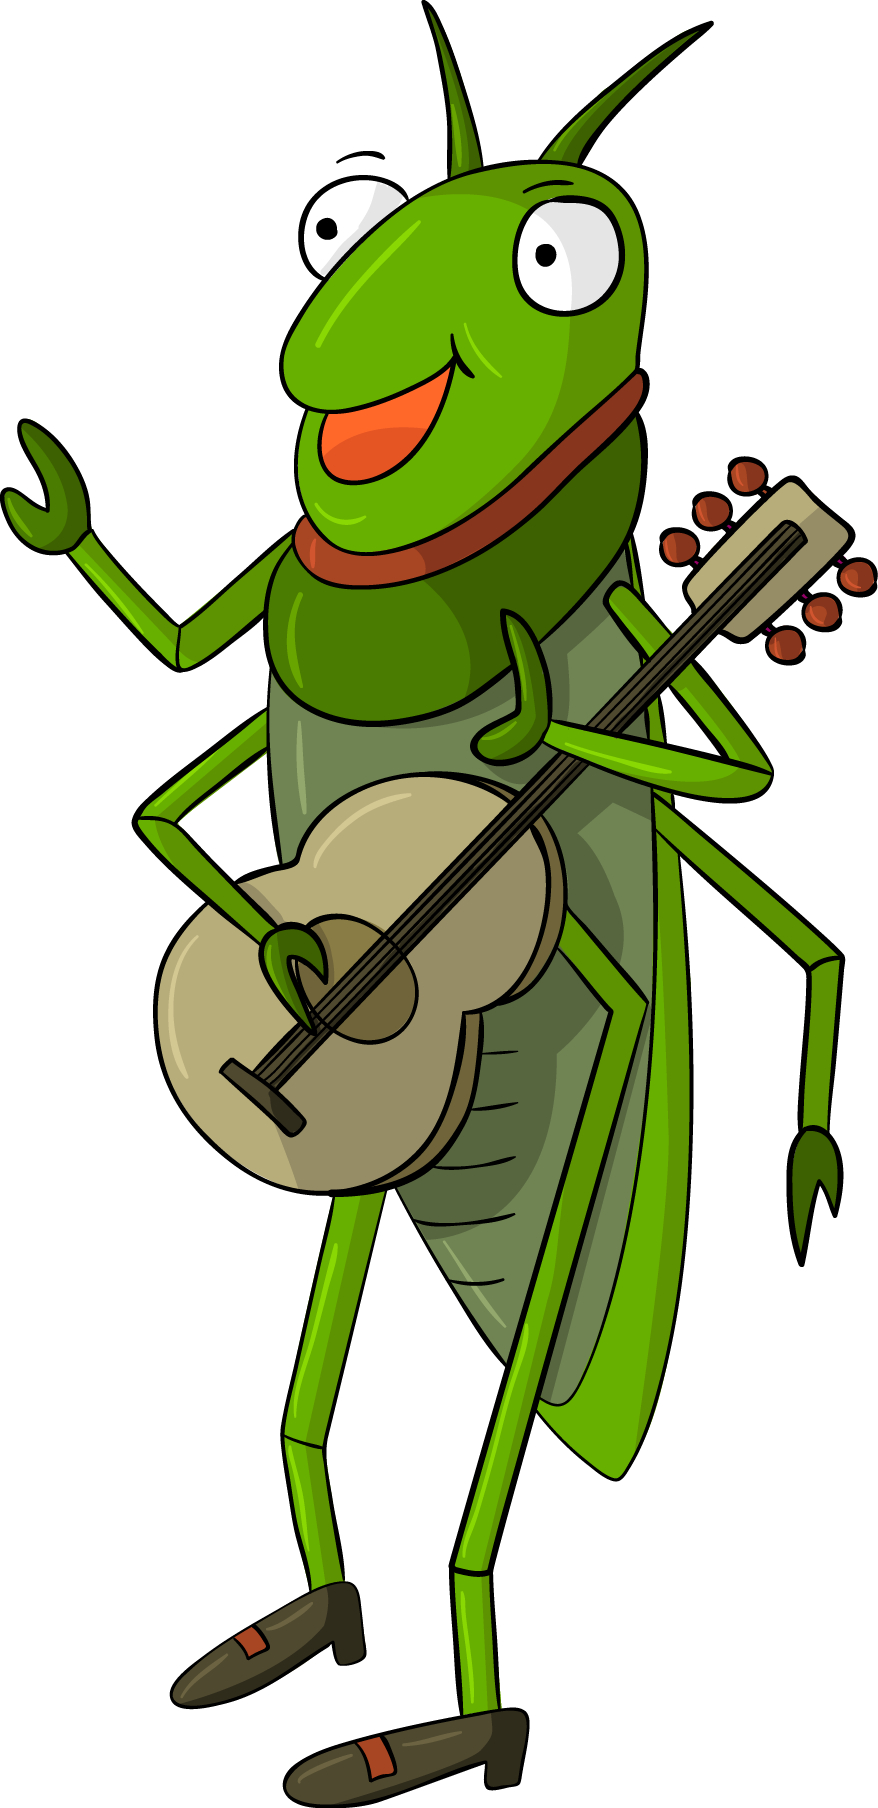 Cricket Grasshopper Illustration Playing Guitar Insect Vector Clipart